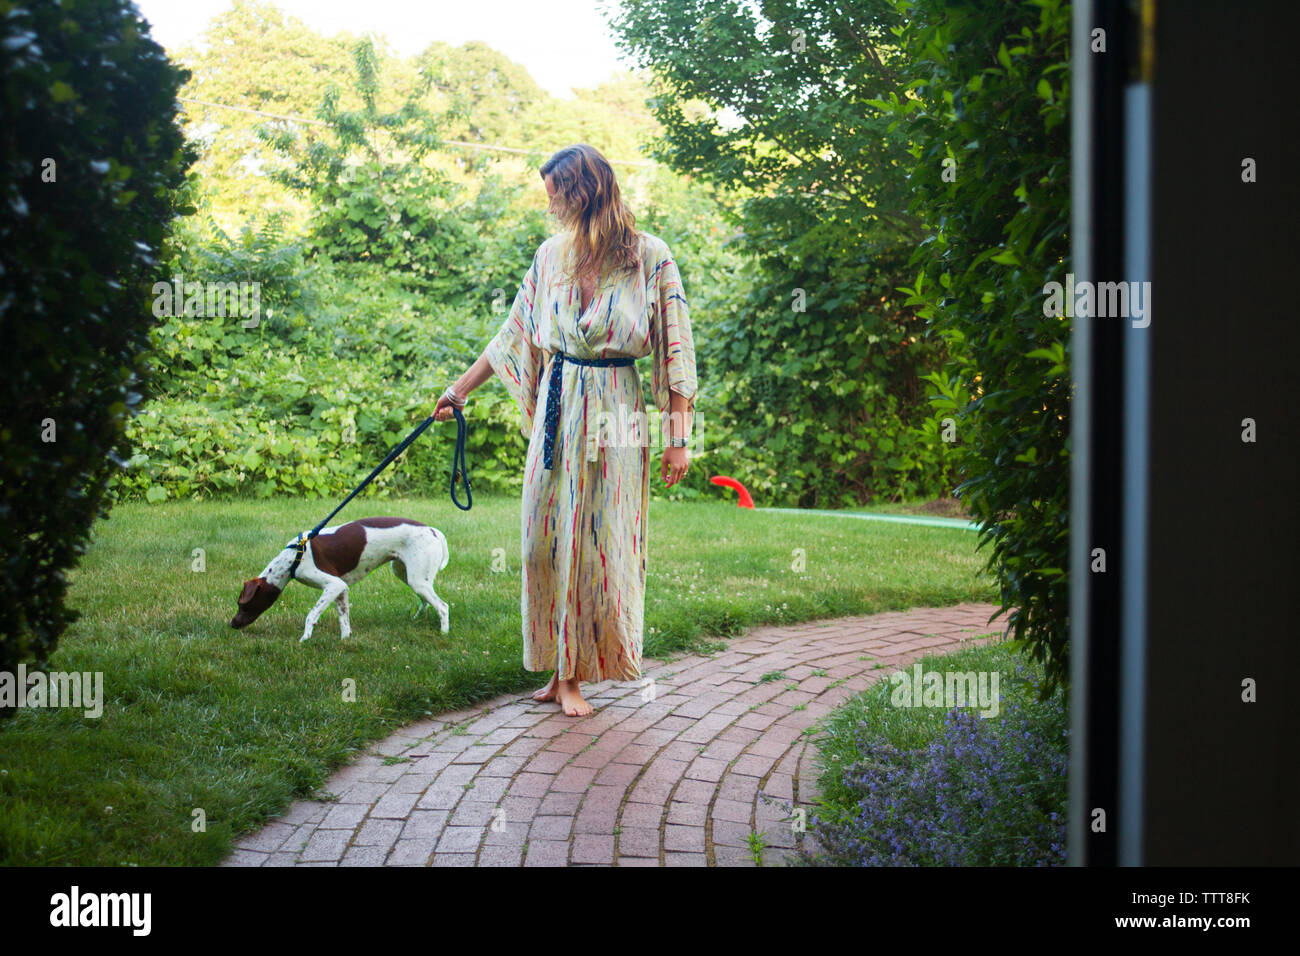 Woman walking with dog on pathway in yard Banque D'Images